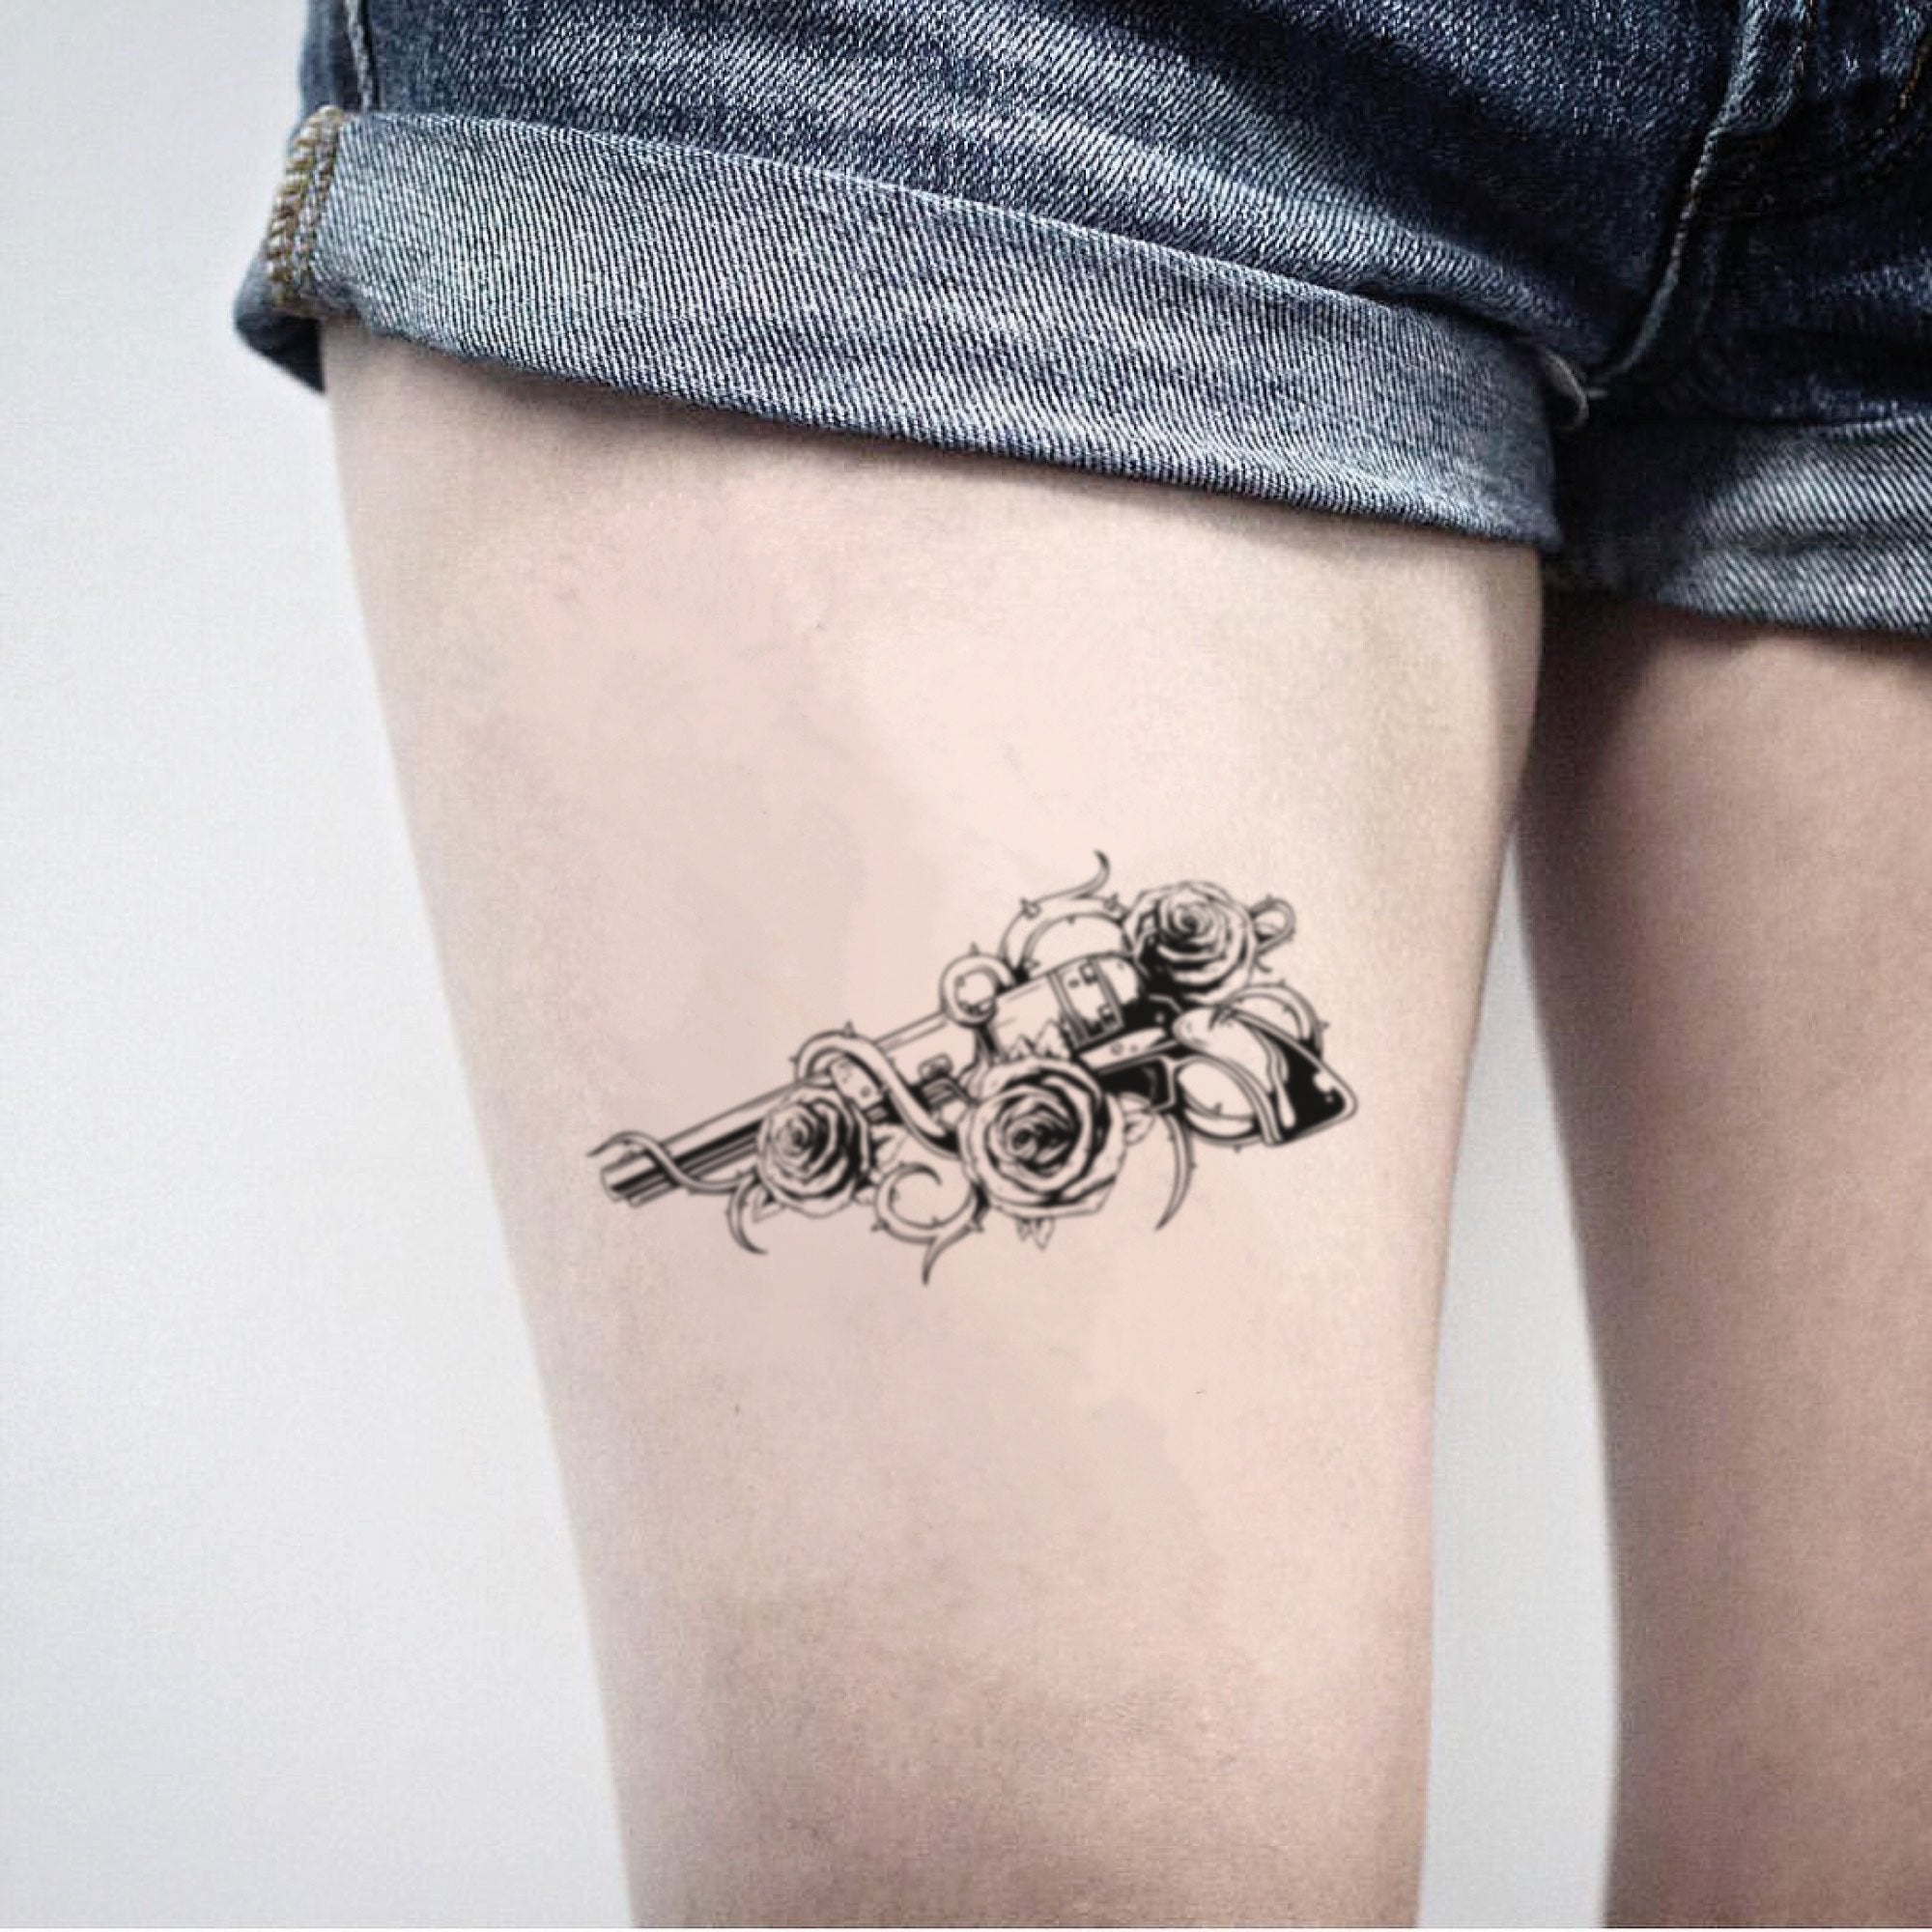 79 Extremely Creative Tattoo Drawings to Try at Home  Tattoo design  drawings Wood tattoo Cool tattoo drawings